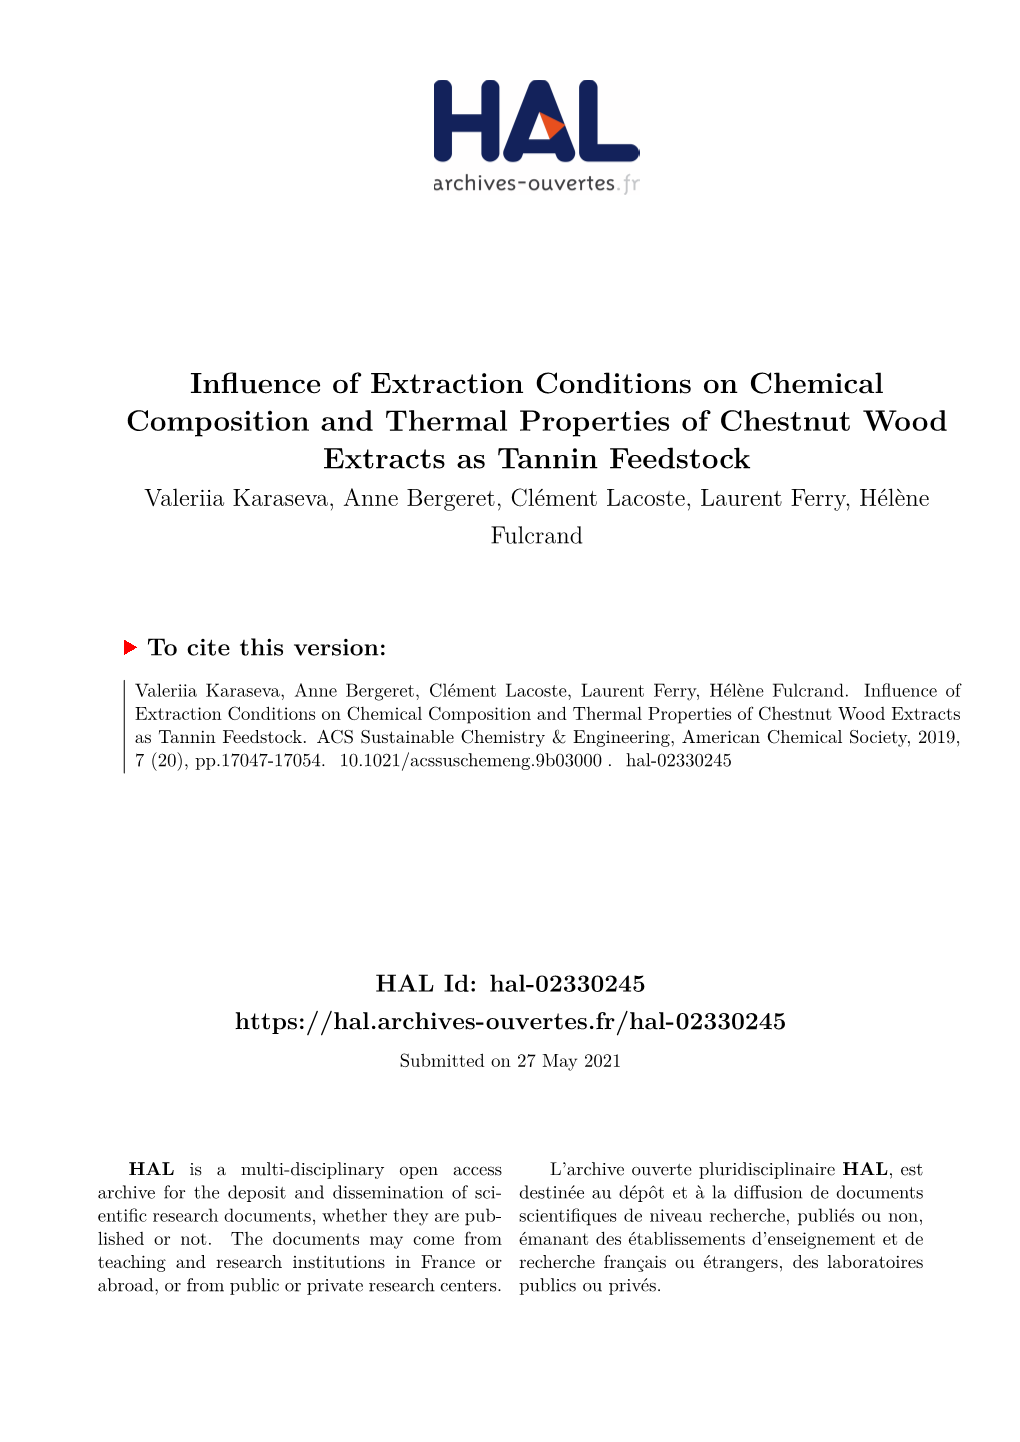 Influence of Extraction Conditions on Chemical Composition And